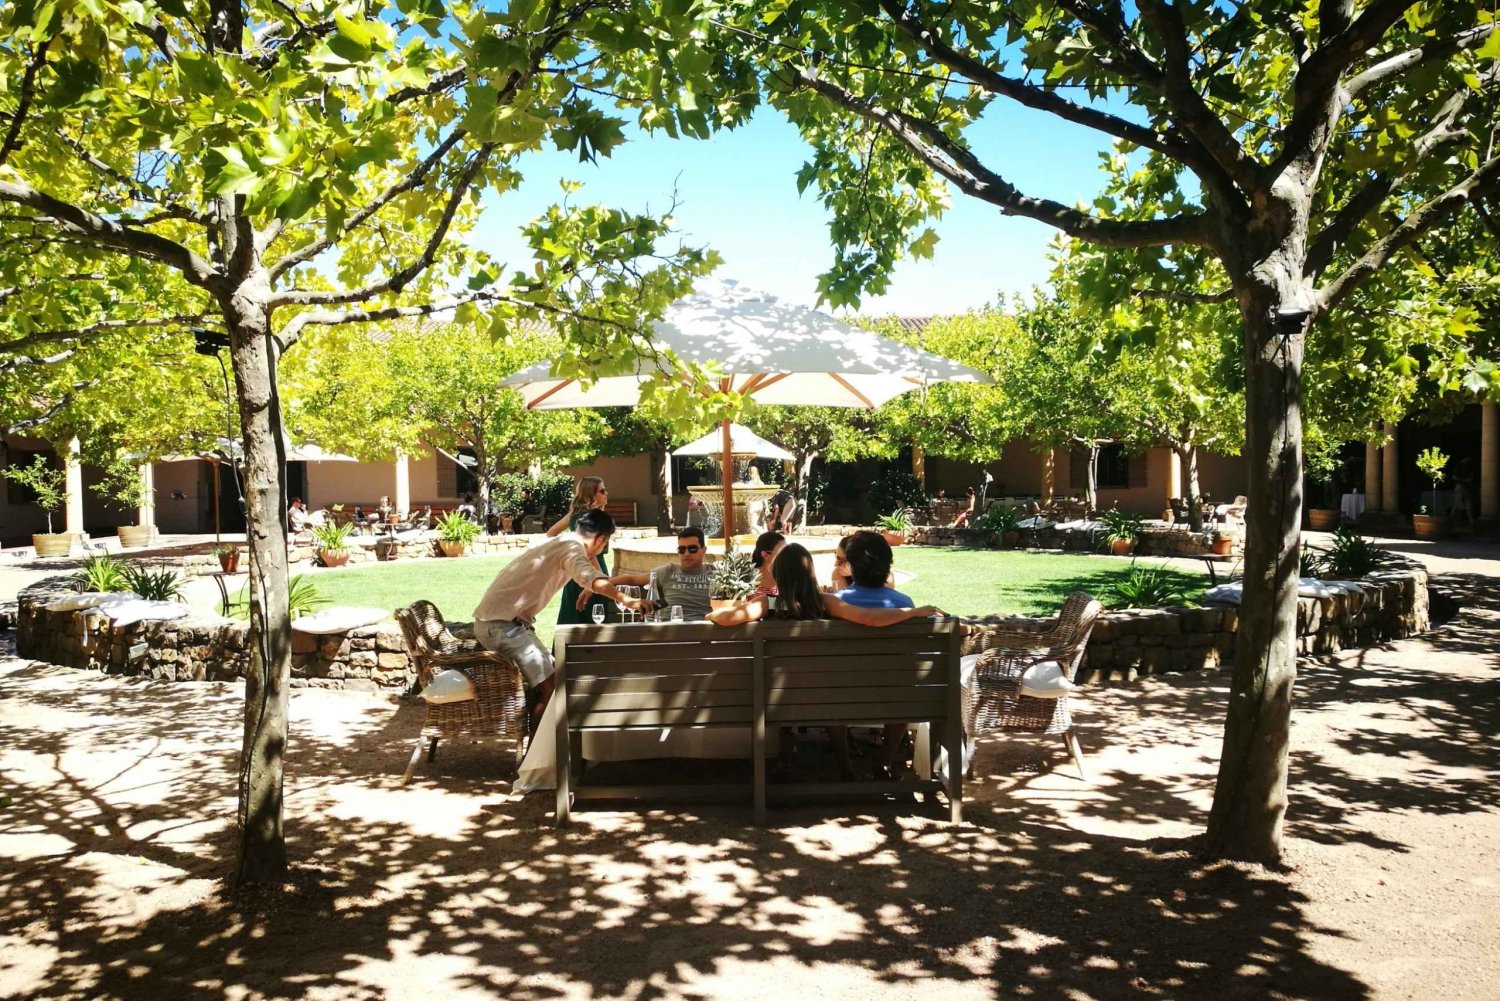 Stellenbosch: Best of the Winelands Private Tour & Tastings